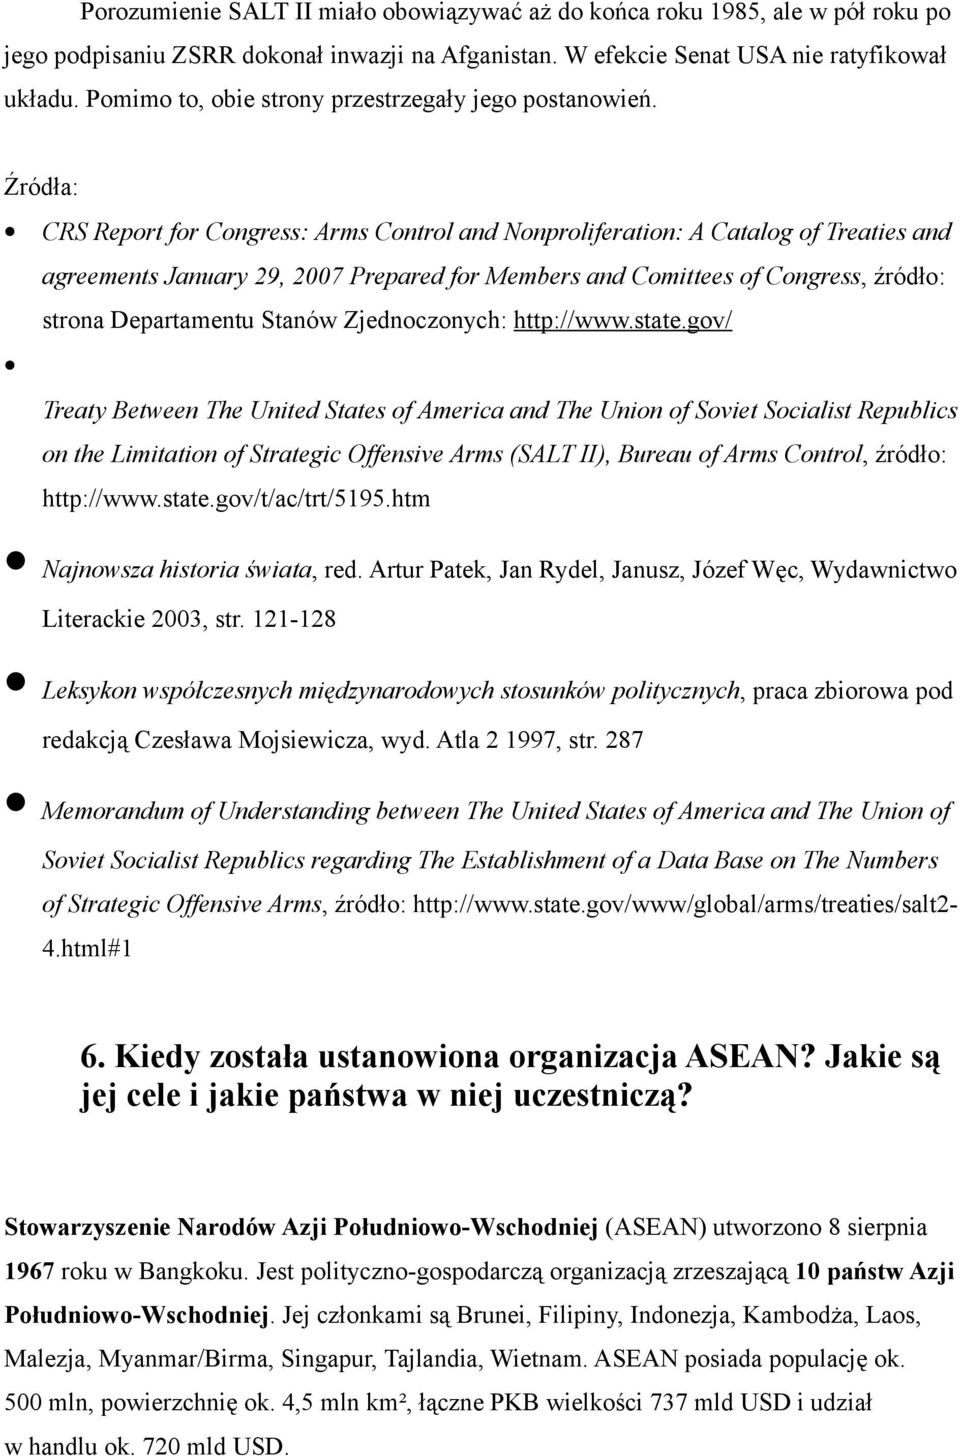 Źródła: CRS Report for Congress: Arms Control and Nonproliferation: A Catalog of Treaties and agreements January 29, 2007 Prepared for Members and Comittees of Congress, źródło: strona Departamentu